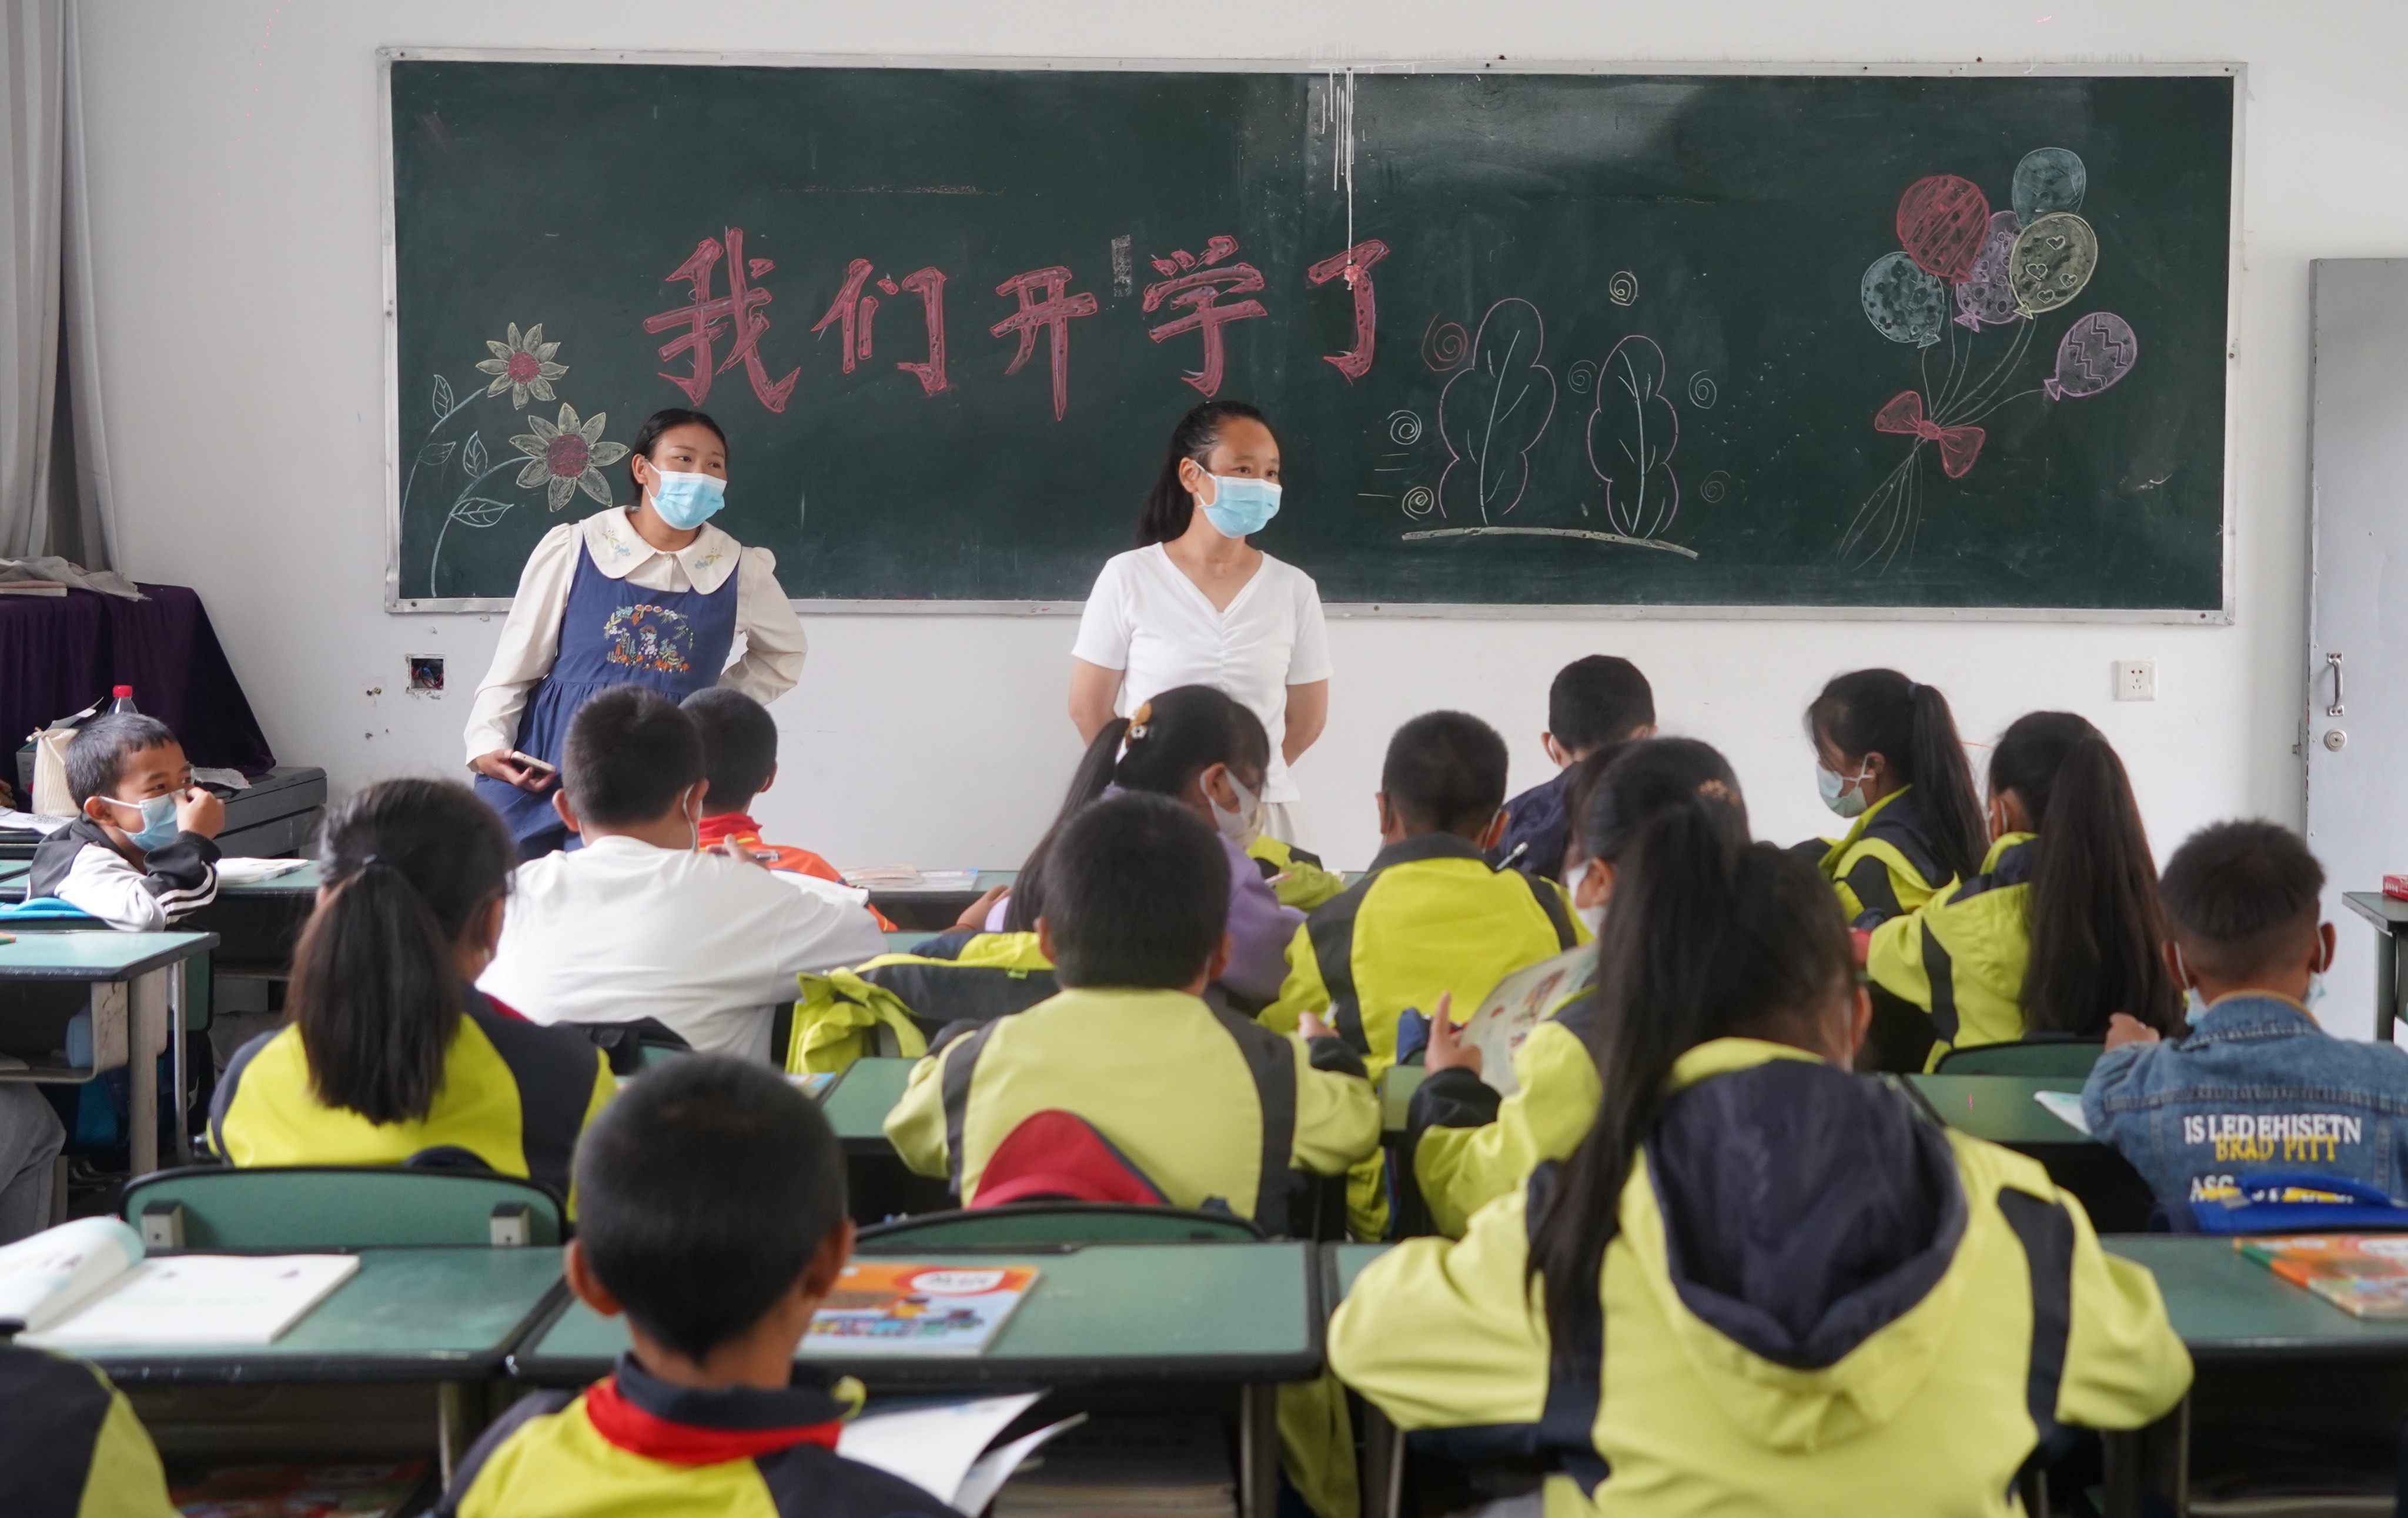 Students during a class in southwest China’s Sichuan province. More Chinese parents are looking at regional neighbours such as Singapore, Thailand and Malaysia as candidates for their children’s secondary and tertiary education. Photo: Xinhua